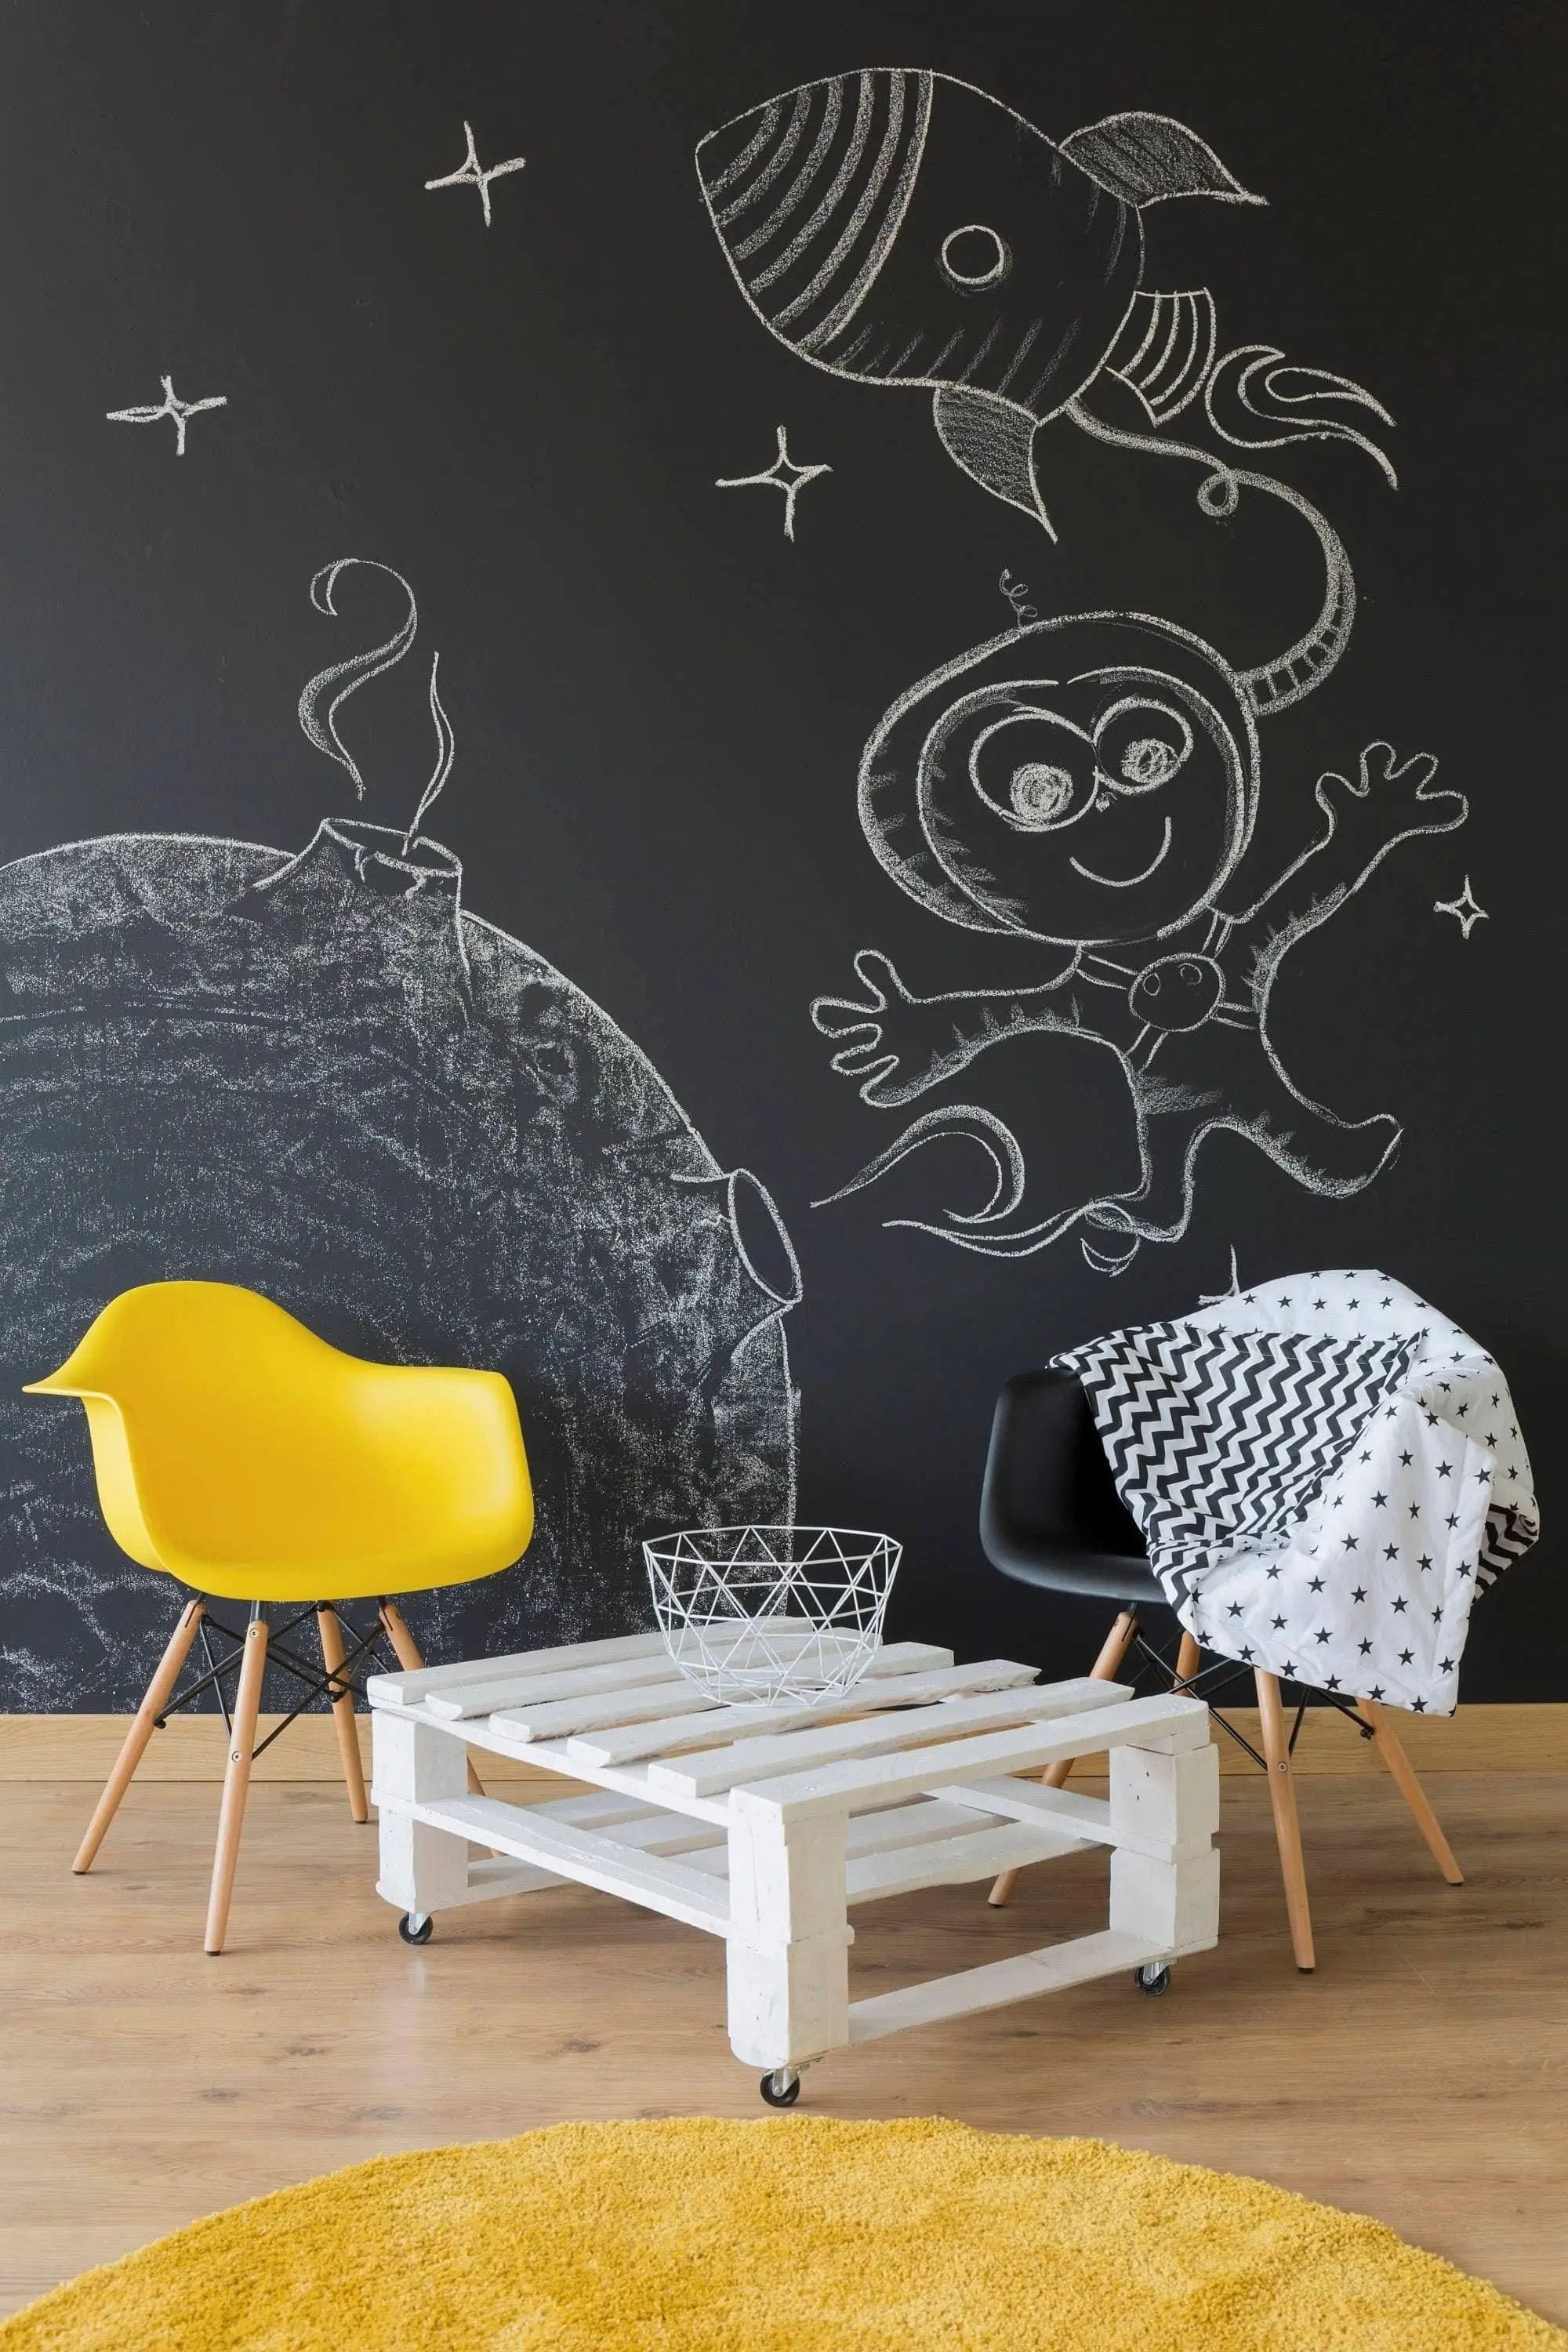 Chalkboard Calendar with Notes Wall Decals Wall Stickers - Bed